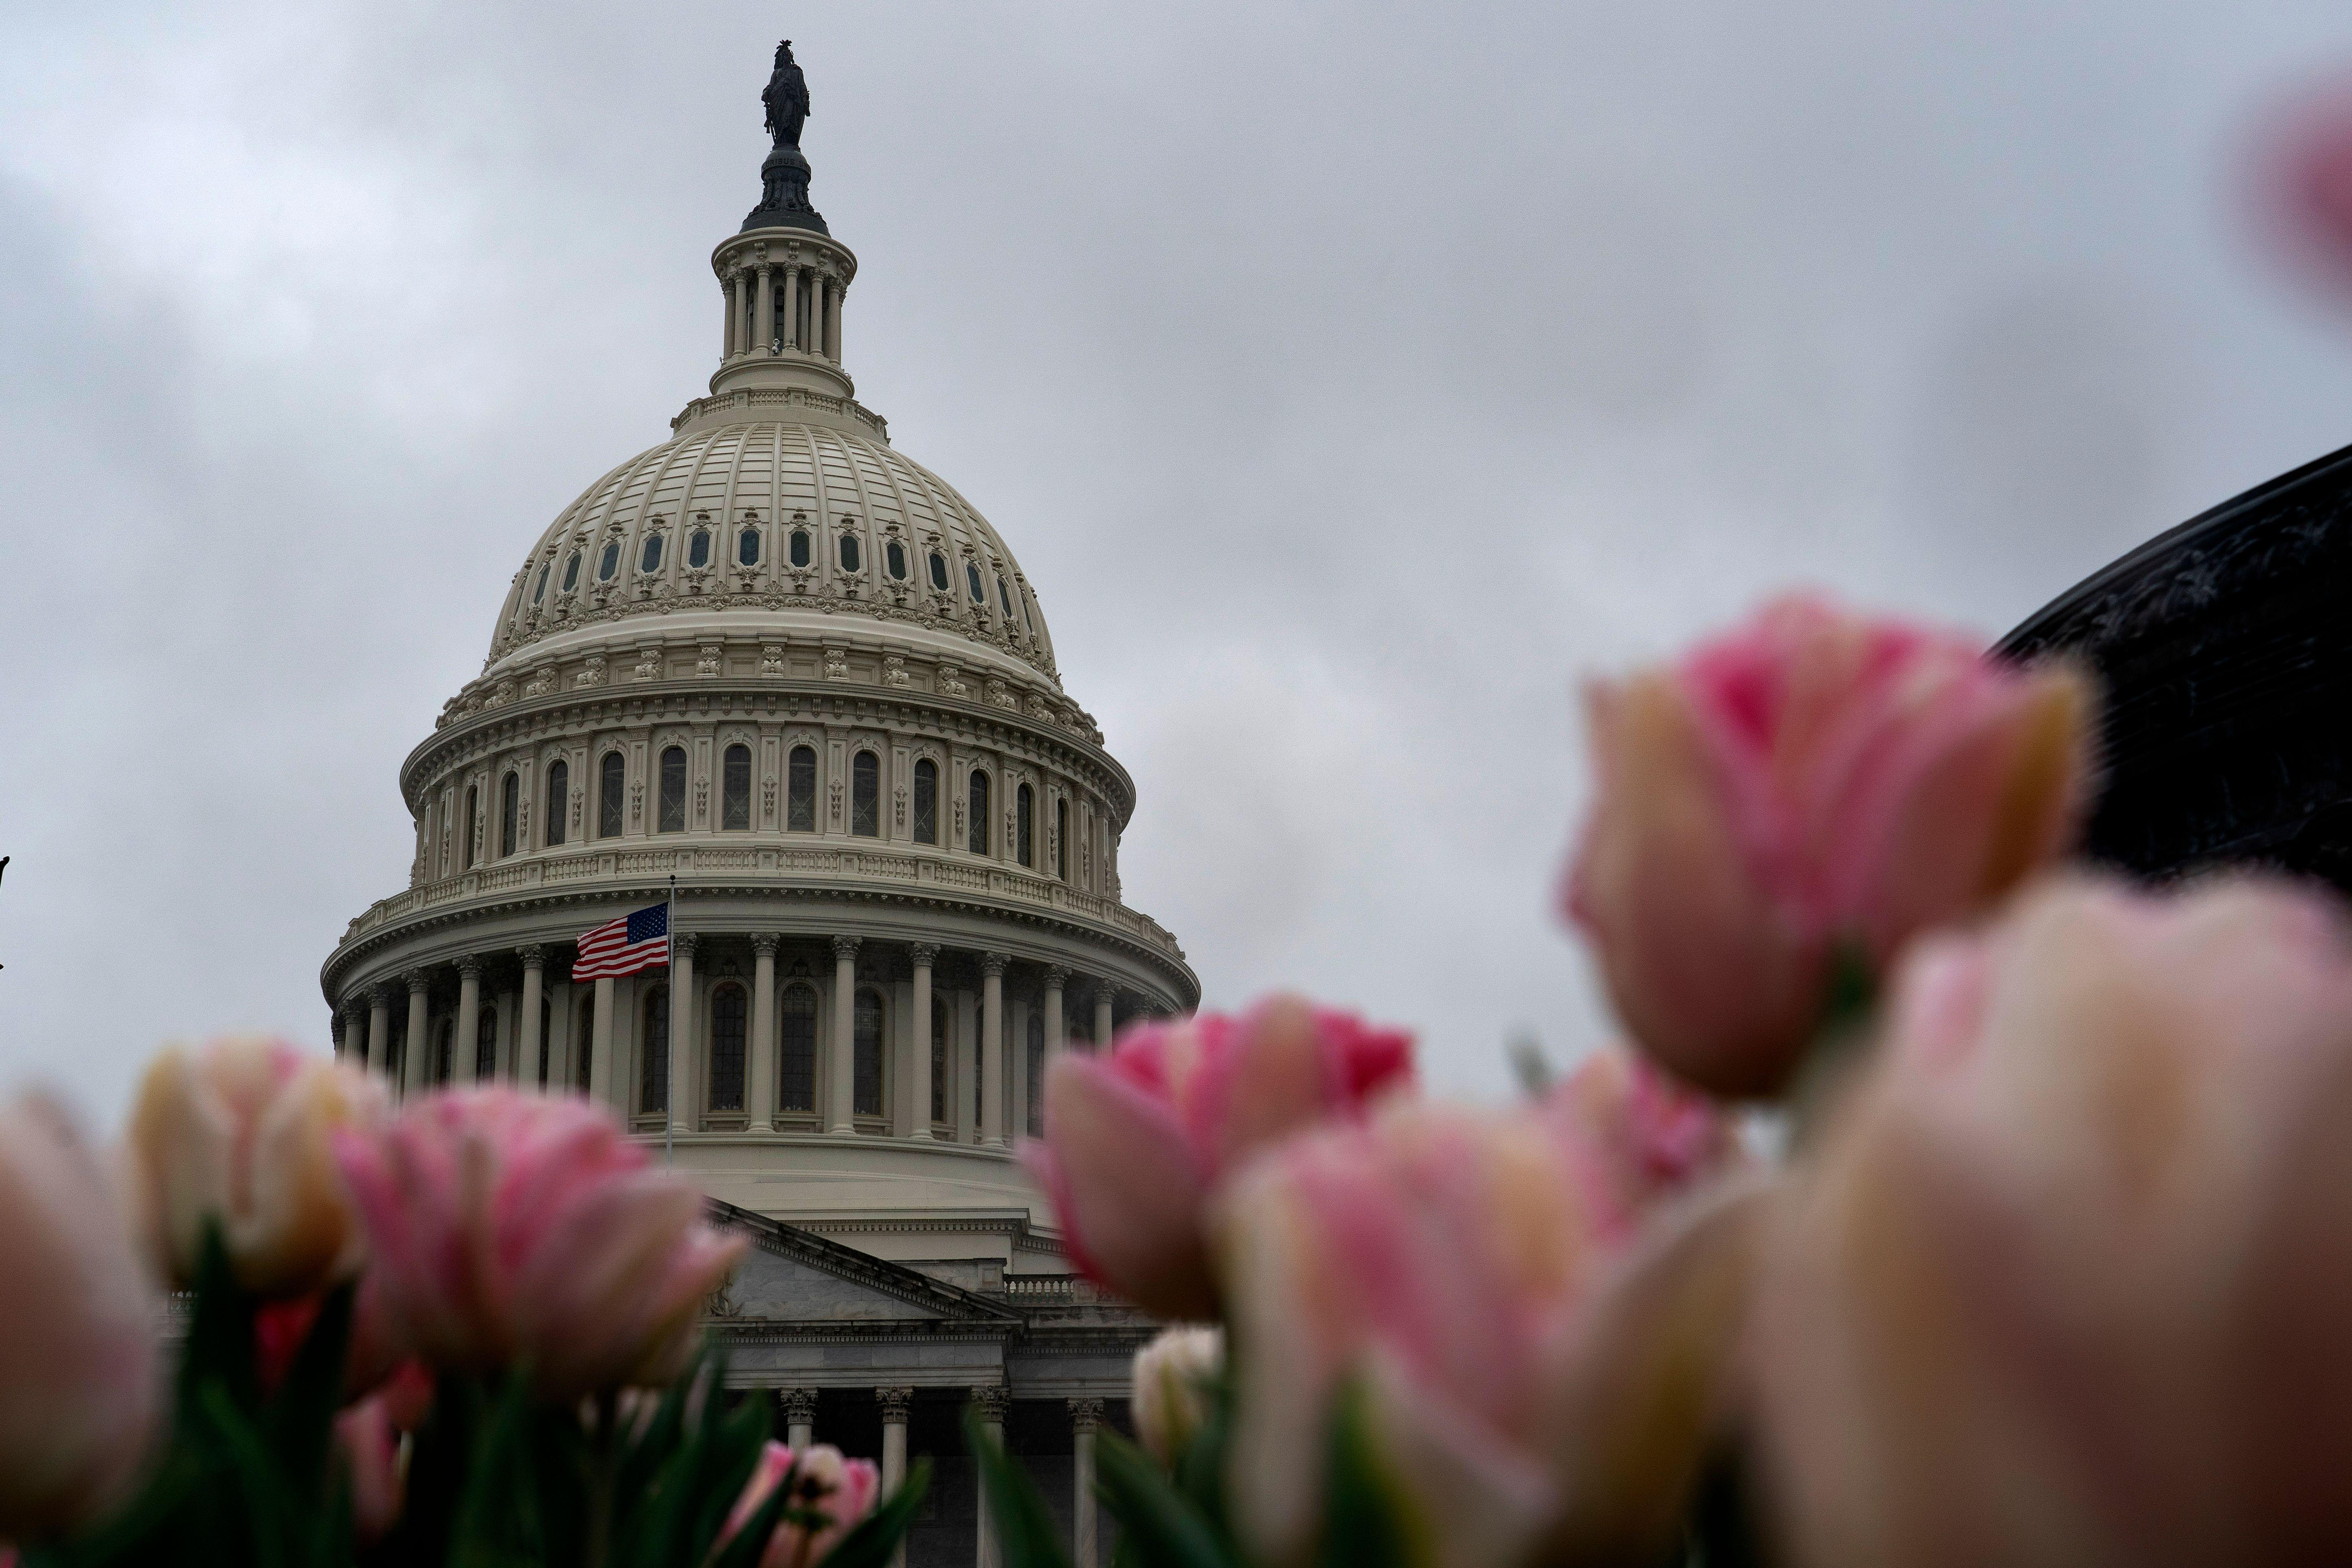 Low-angle shot of the Capitol Dome with pink flowers in the foreground.